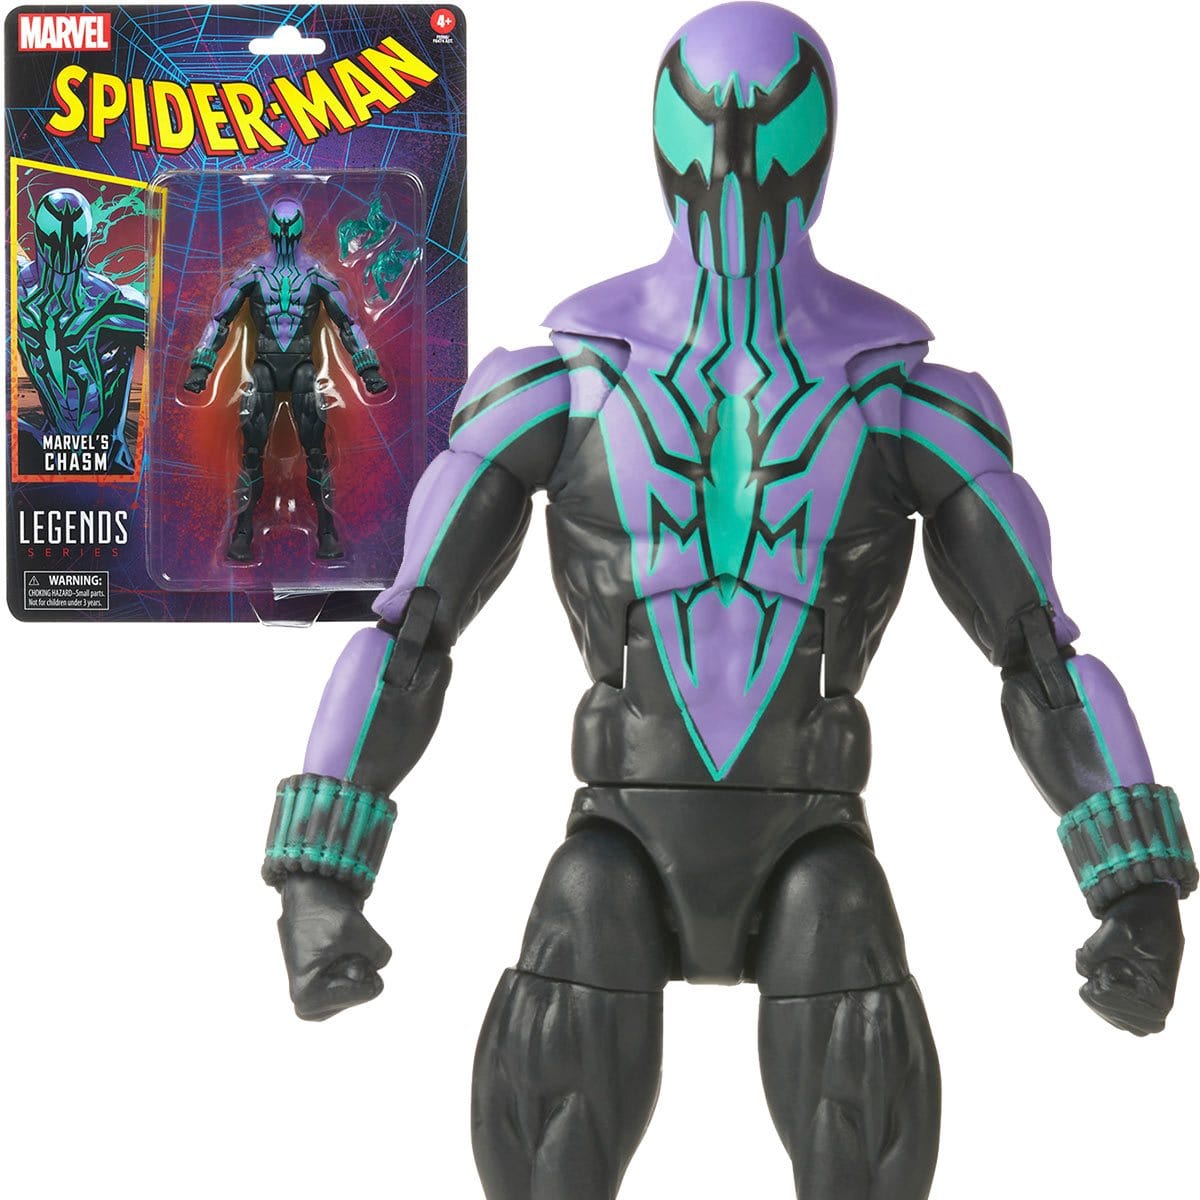 Spider-Man Retro Marvel Legends Chasm 6-Inch Action Figure With Display